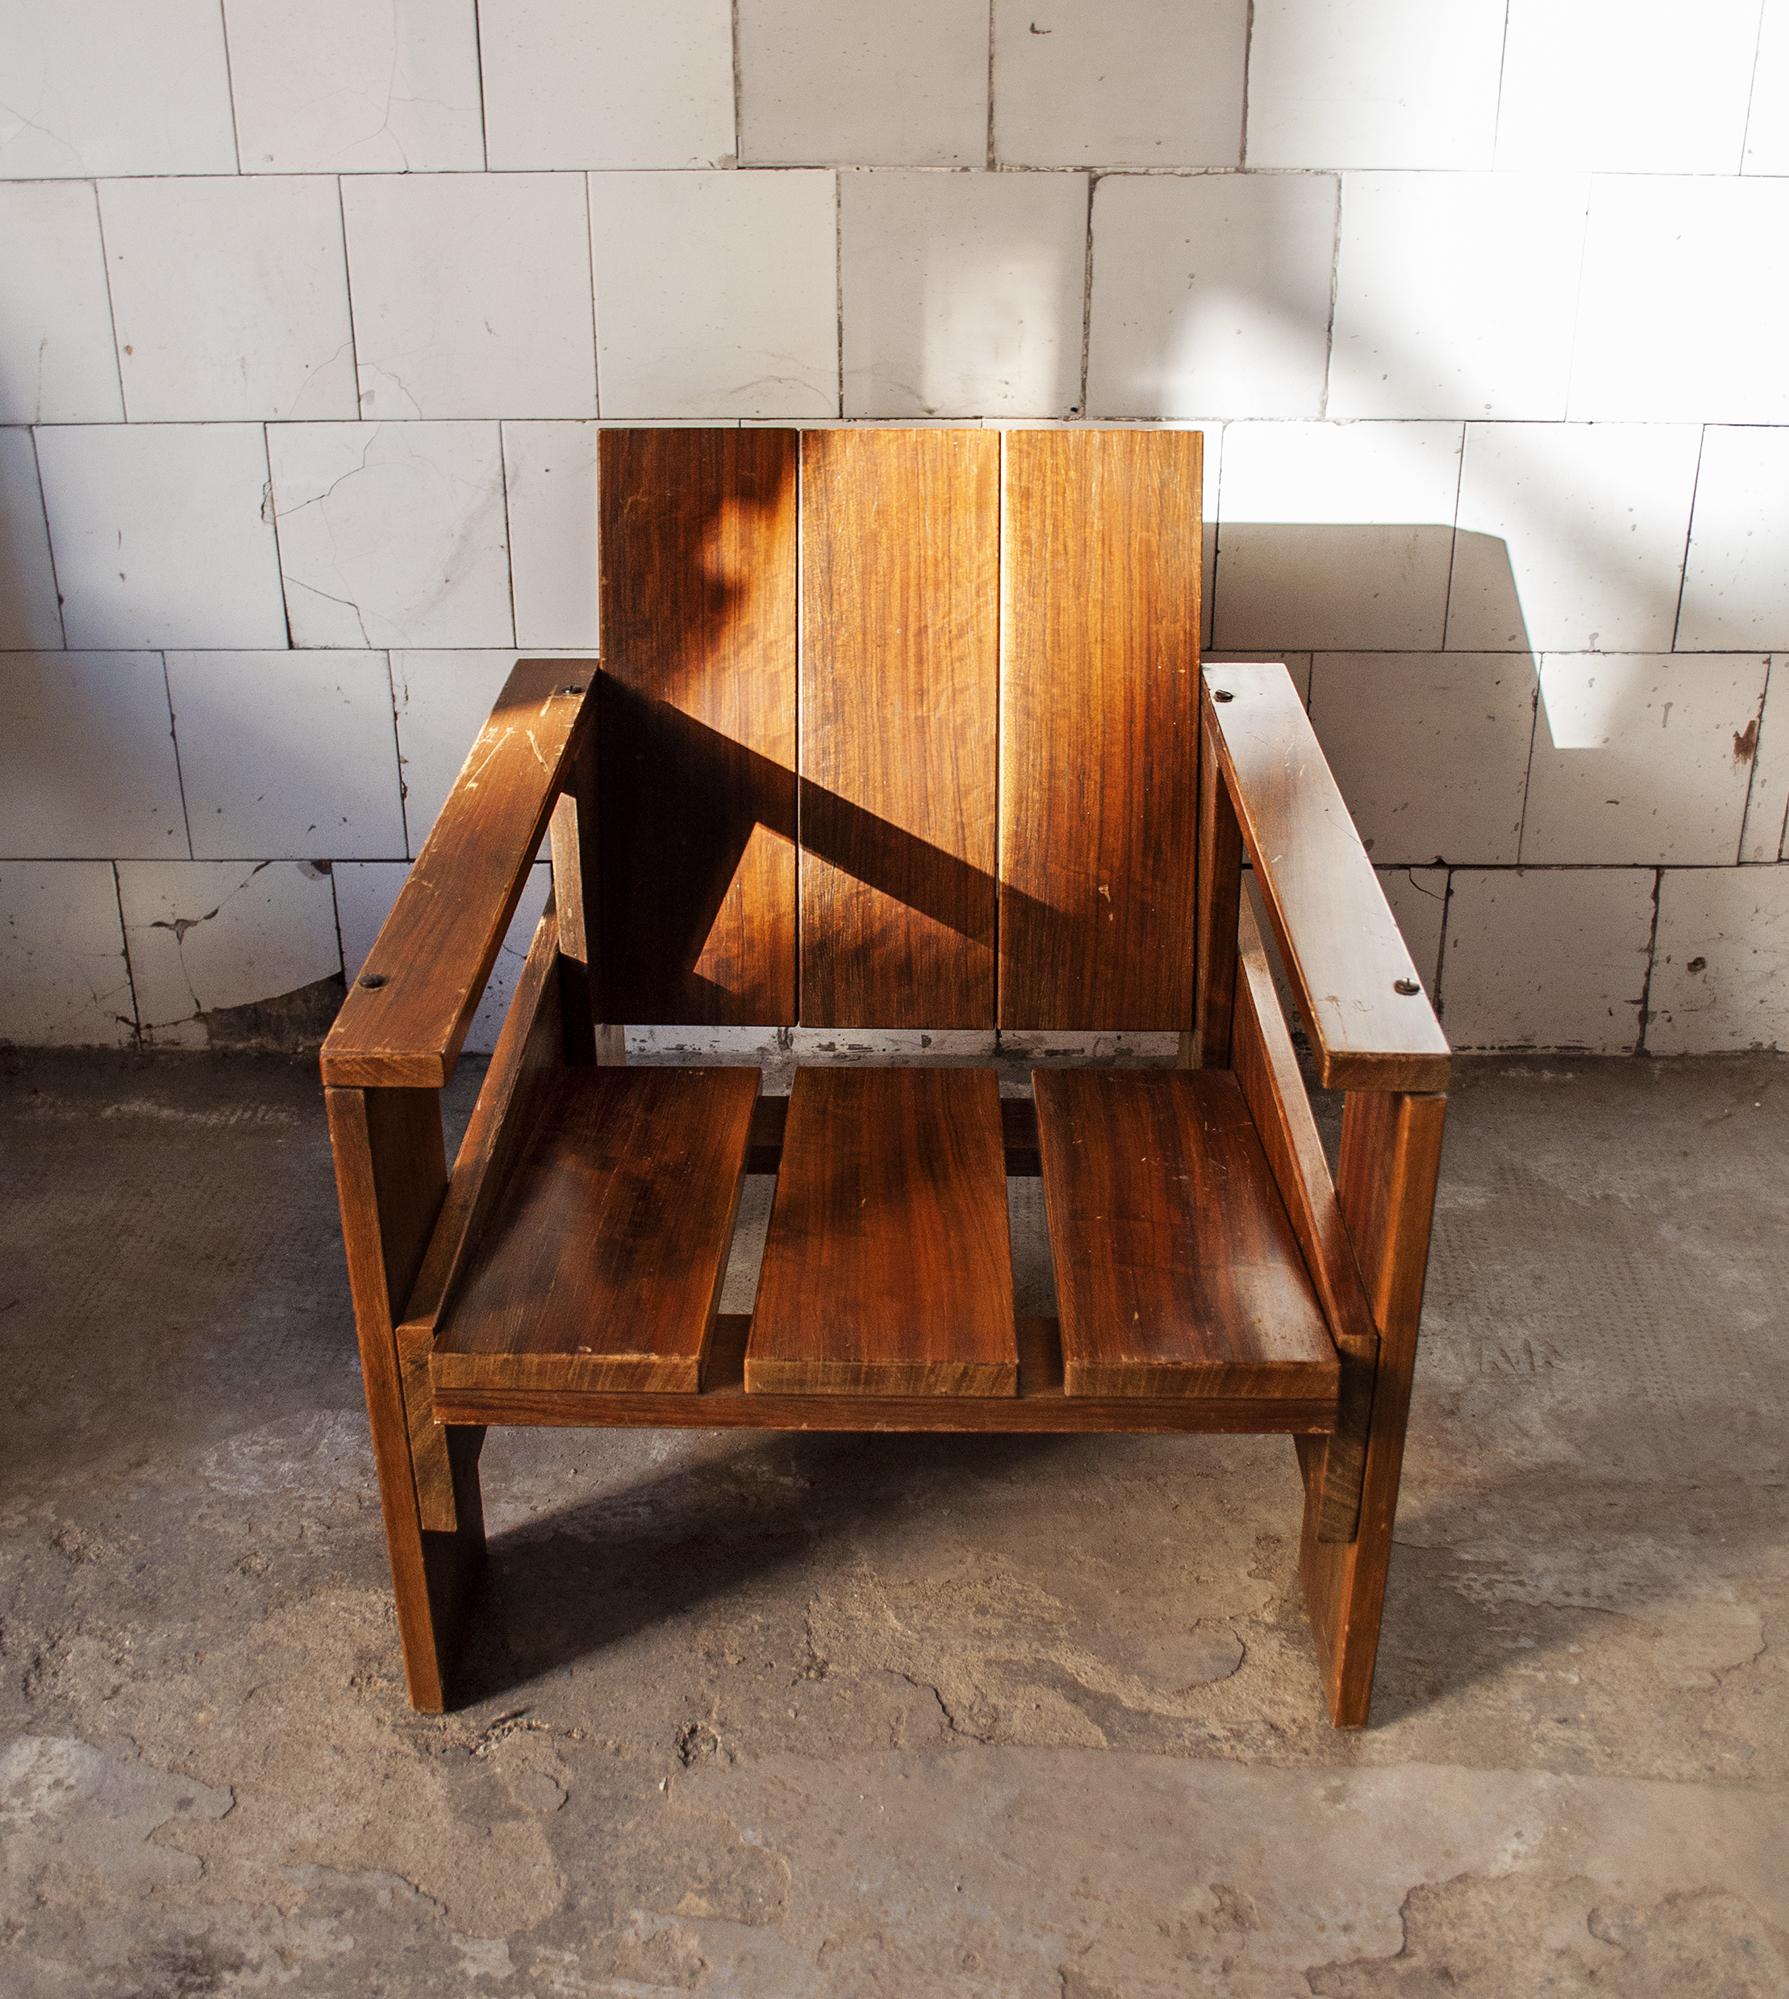 Italian Rosewood Armchair with Brass Screws, Inspired by Gerrit Rietveld Bauhaus, 1950s For Sale